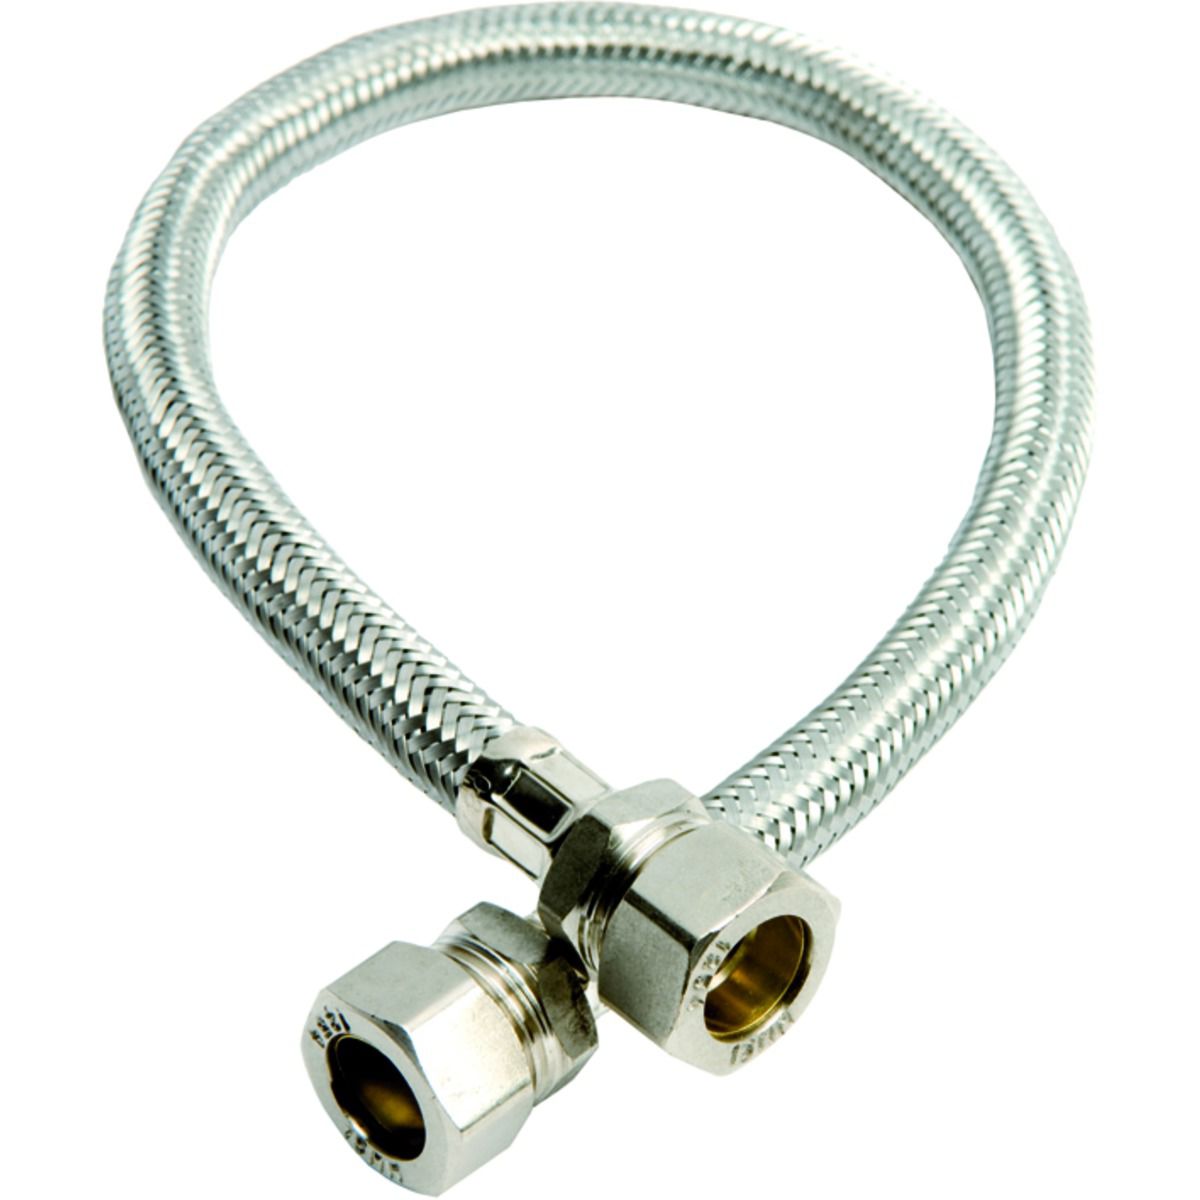 Image of Primaflow Flexible Compression Tap Connector - 15 X 15 X 300mm